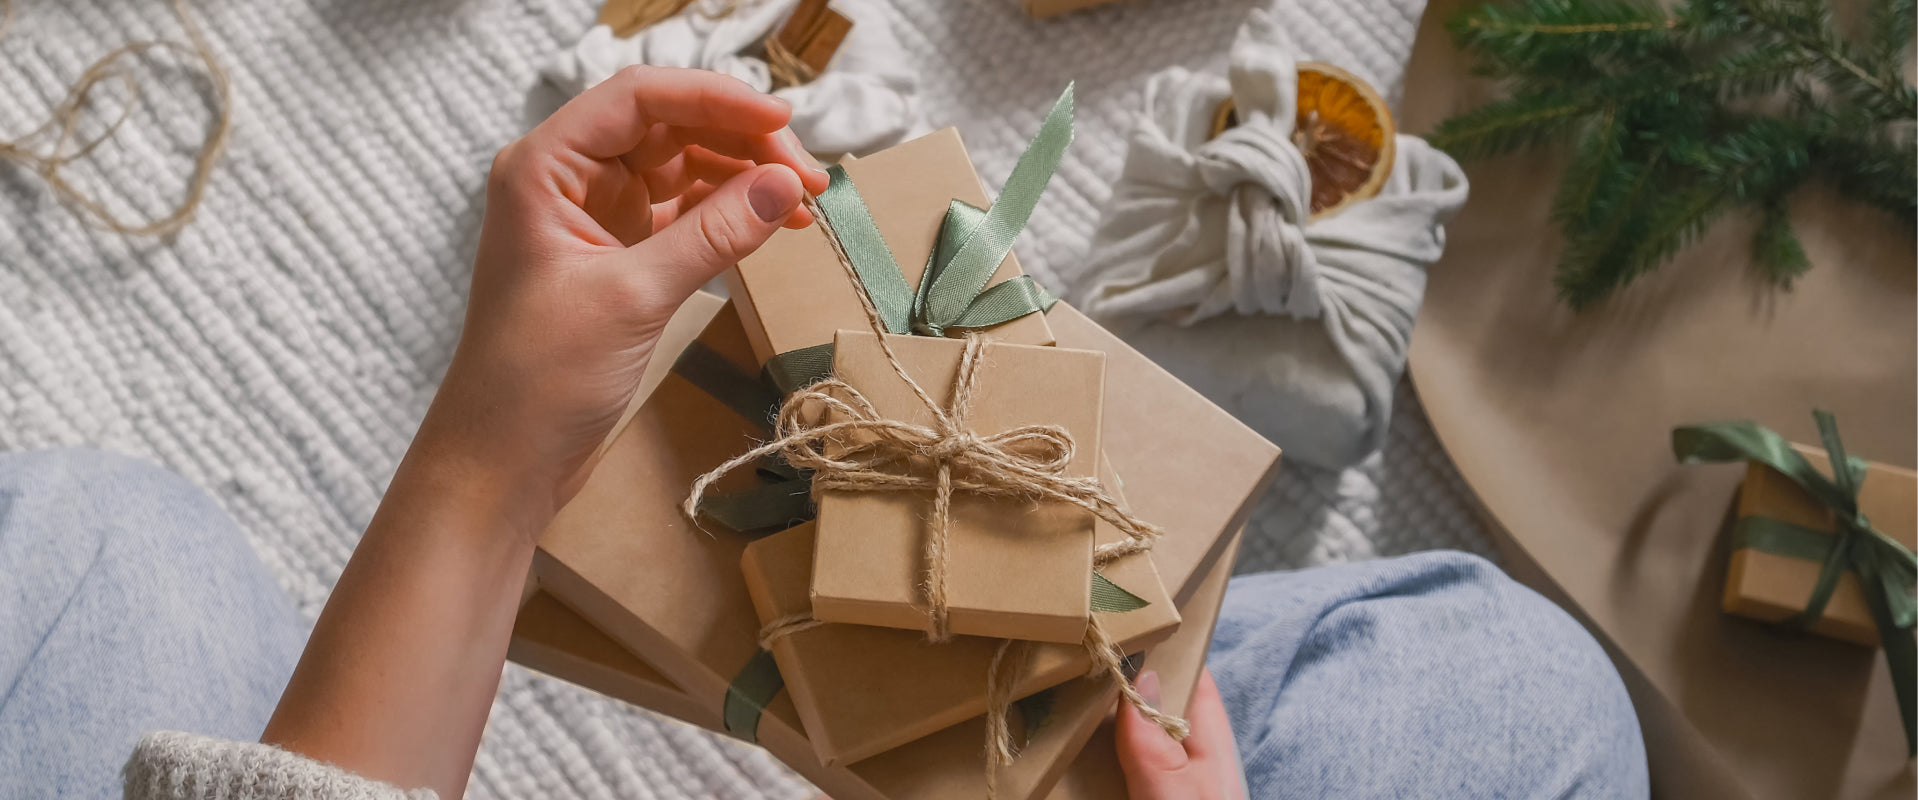 48 Stunning Christmas Gifts for Boyfriend's Parents